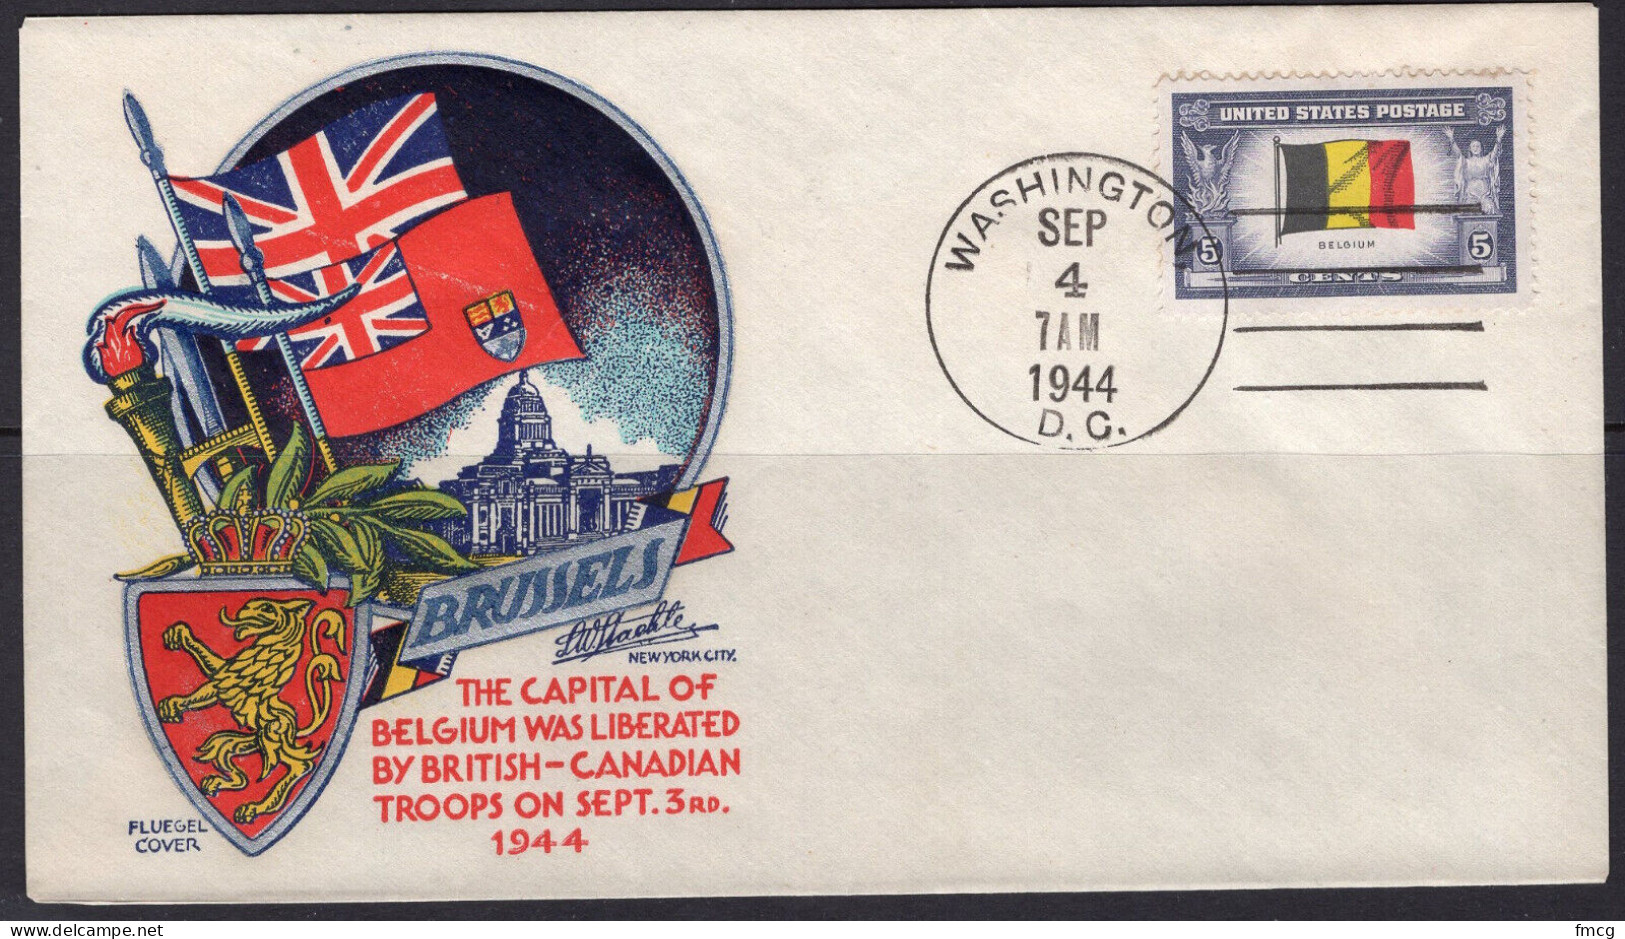 1945 Staehle Cover - World War II, Brussels Liberated, Sept 4, Washington DC - Covers & Documents